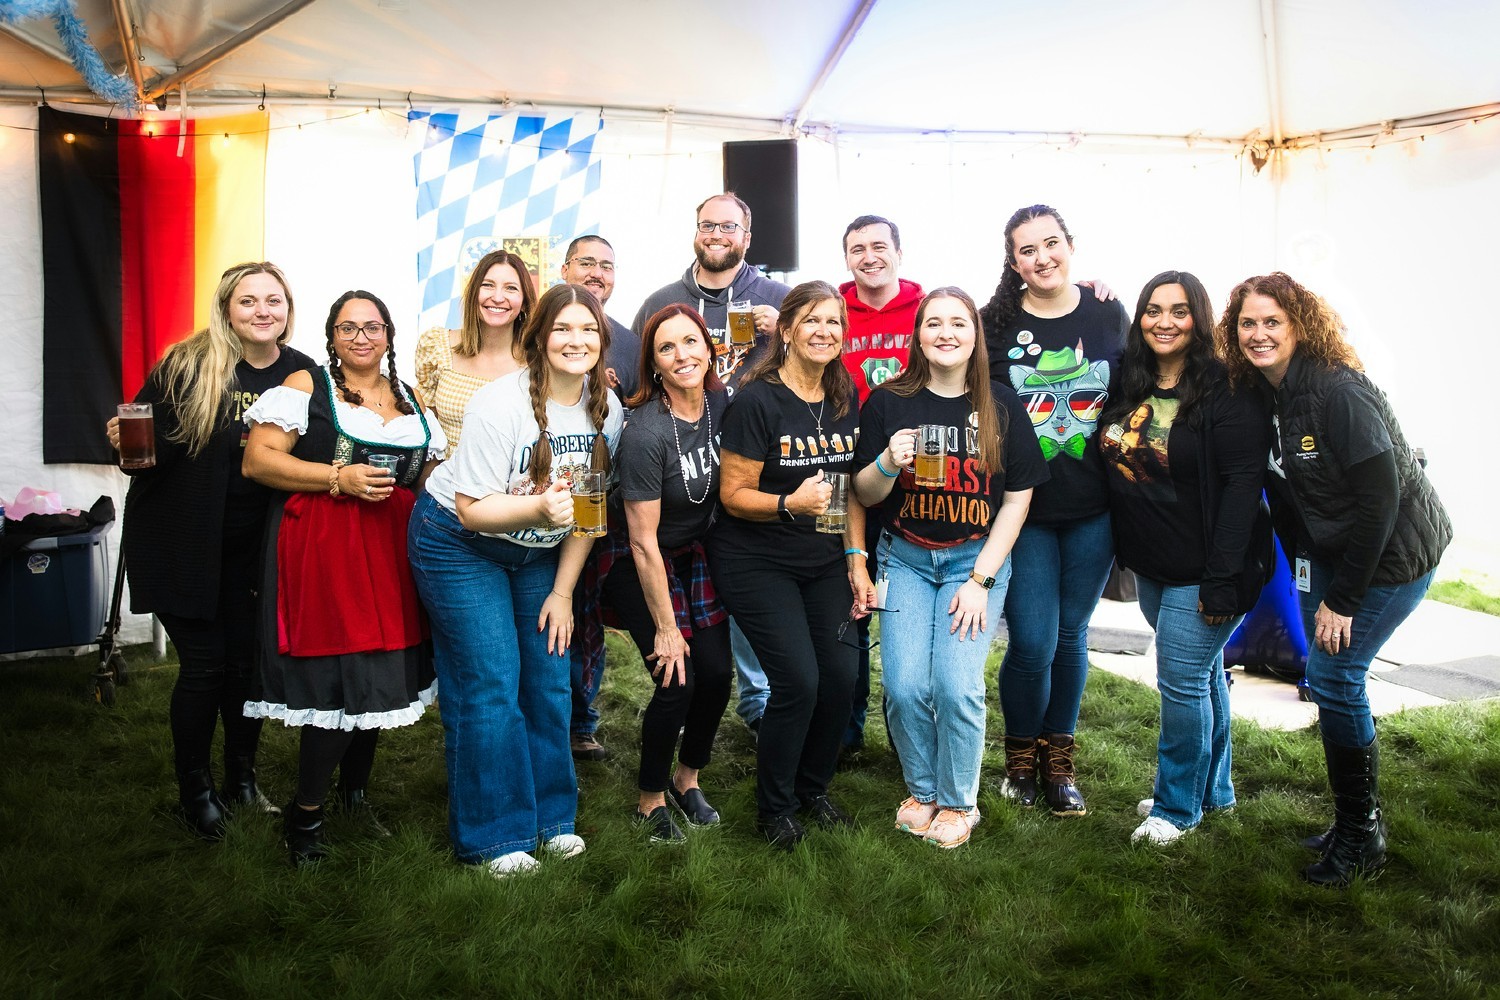 Oktoberfest 2023! Each year we host our Oktoberfest party filled with good food, music, competitions, and fun!